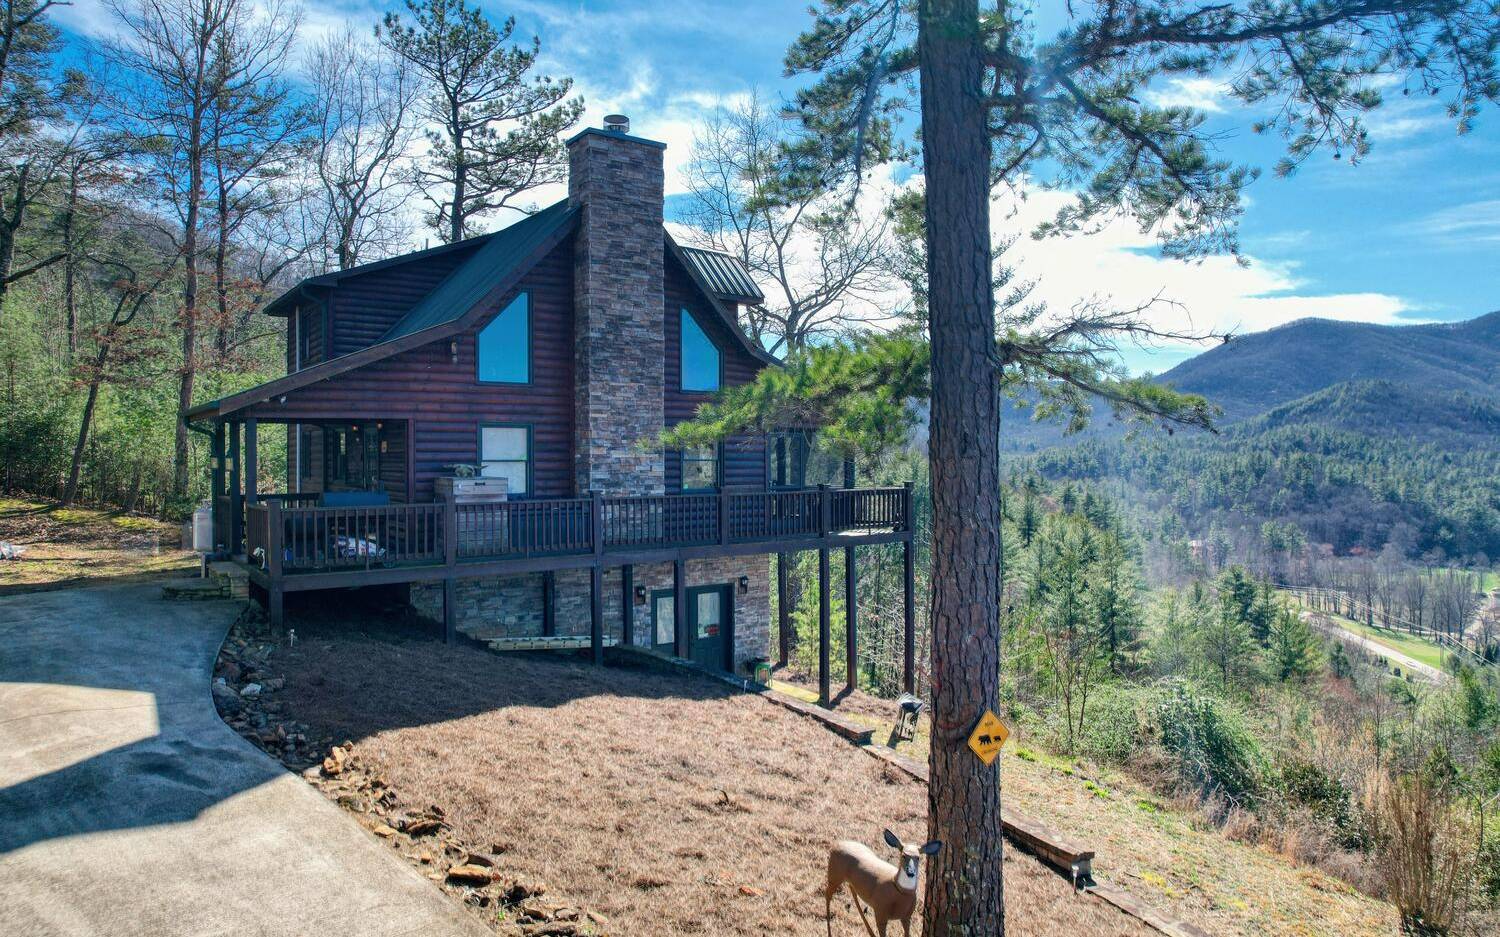 Amazing long range year round views from this 3 bedroom 3 bath sold furnished cabin in the Northeast Georgia Mountains. Concrete drive. Home features floor to ceiling fireplace with beautiful rock work. Flooring is white pine, High cathedral ceilings. Master bedroom on upper level but could also make the main level bedroom your master. Finished basement comes complete with a wet bar, lower level would be perfect for a man cave or even a woman cave, whatever you want to make of it. Views from all levels of home. If you like your privacy this is the perfect mountain home for you. Use as full time home or vacation home. Can also be a vacation rental. Only minutes from town and a close drive to Helen or Clayton Ga. 2 hours from Atlanta. If you love wildlife this home has an abundance of different wildlife to watch and enjoy!